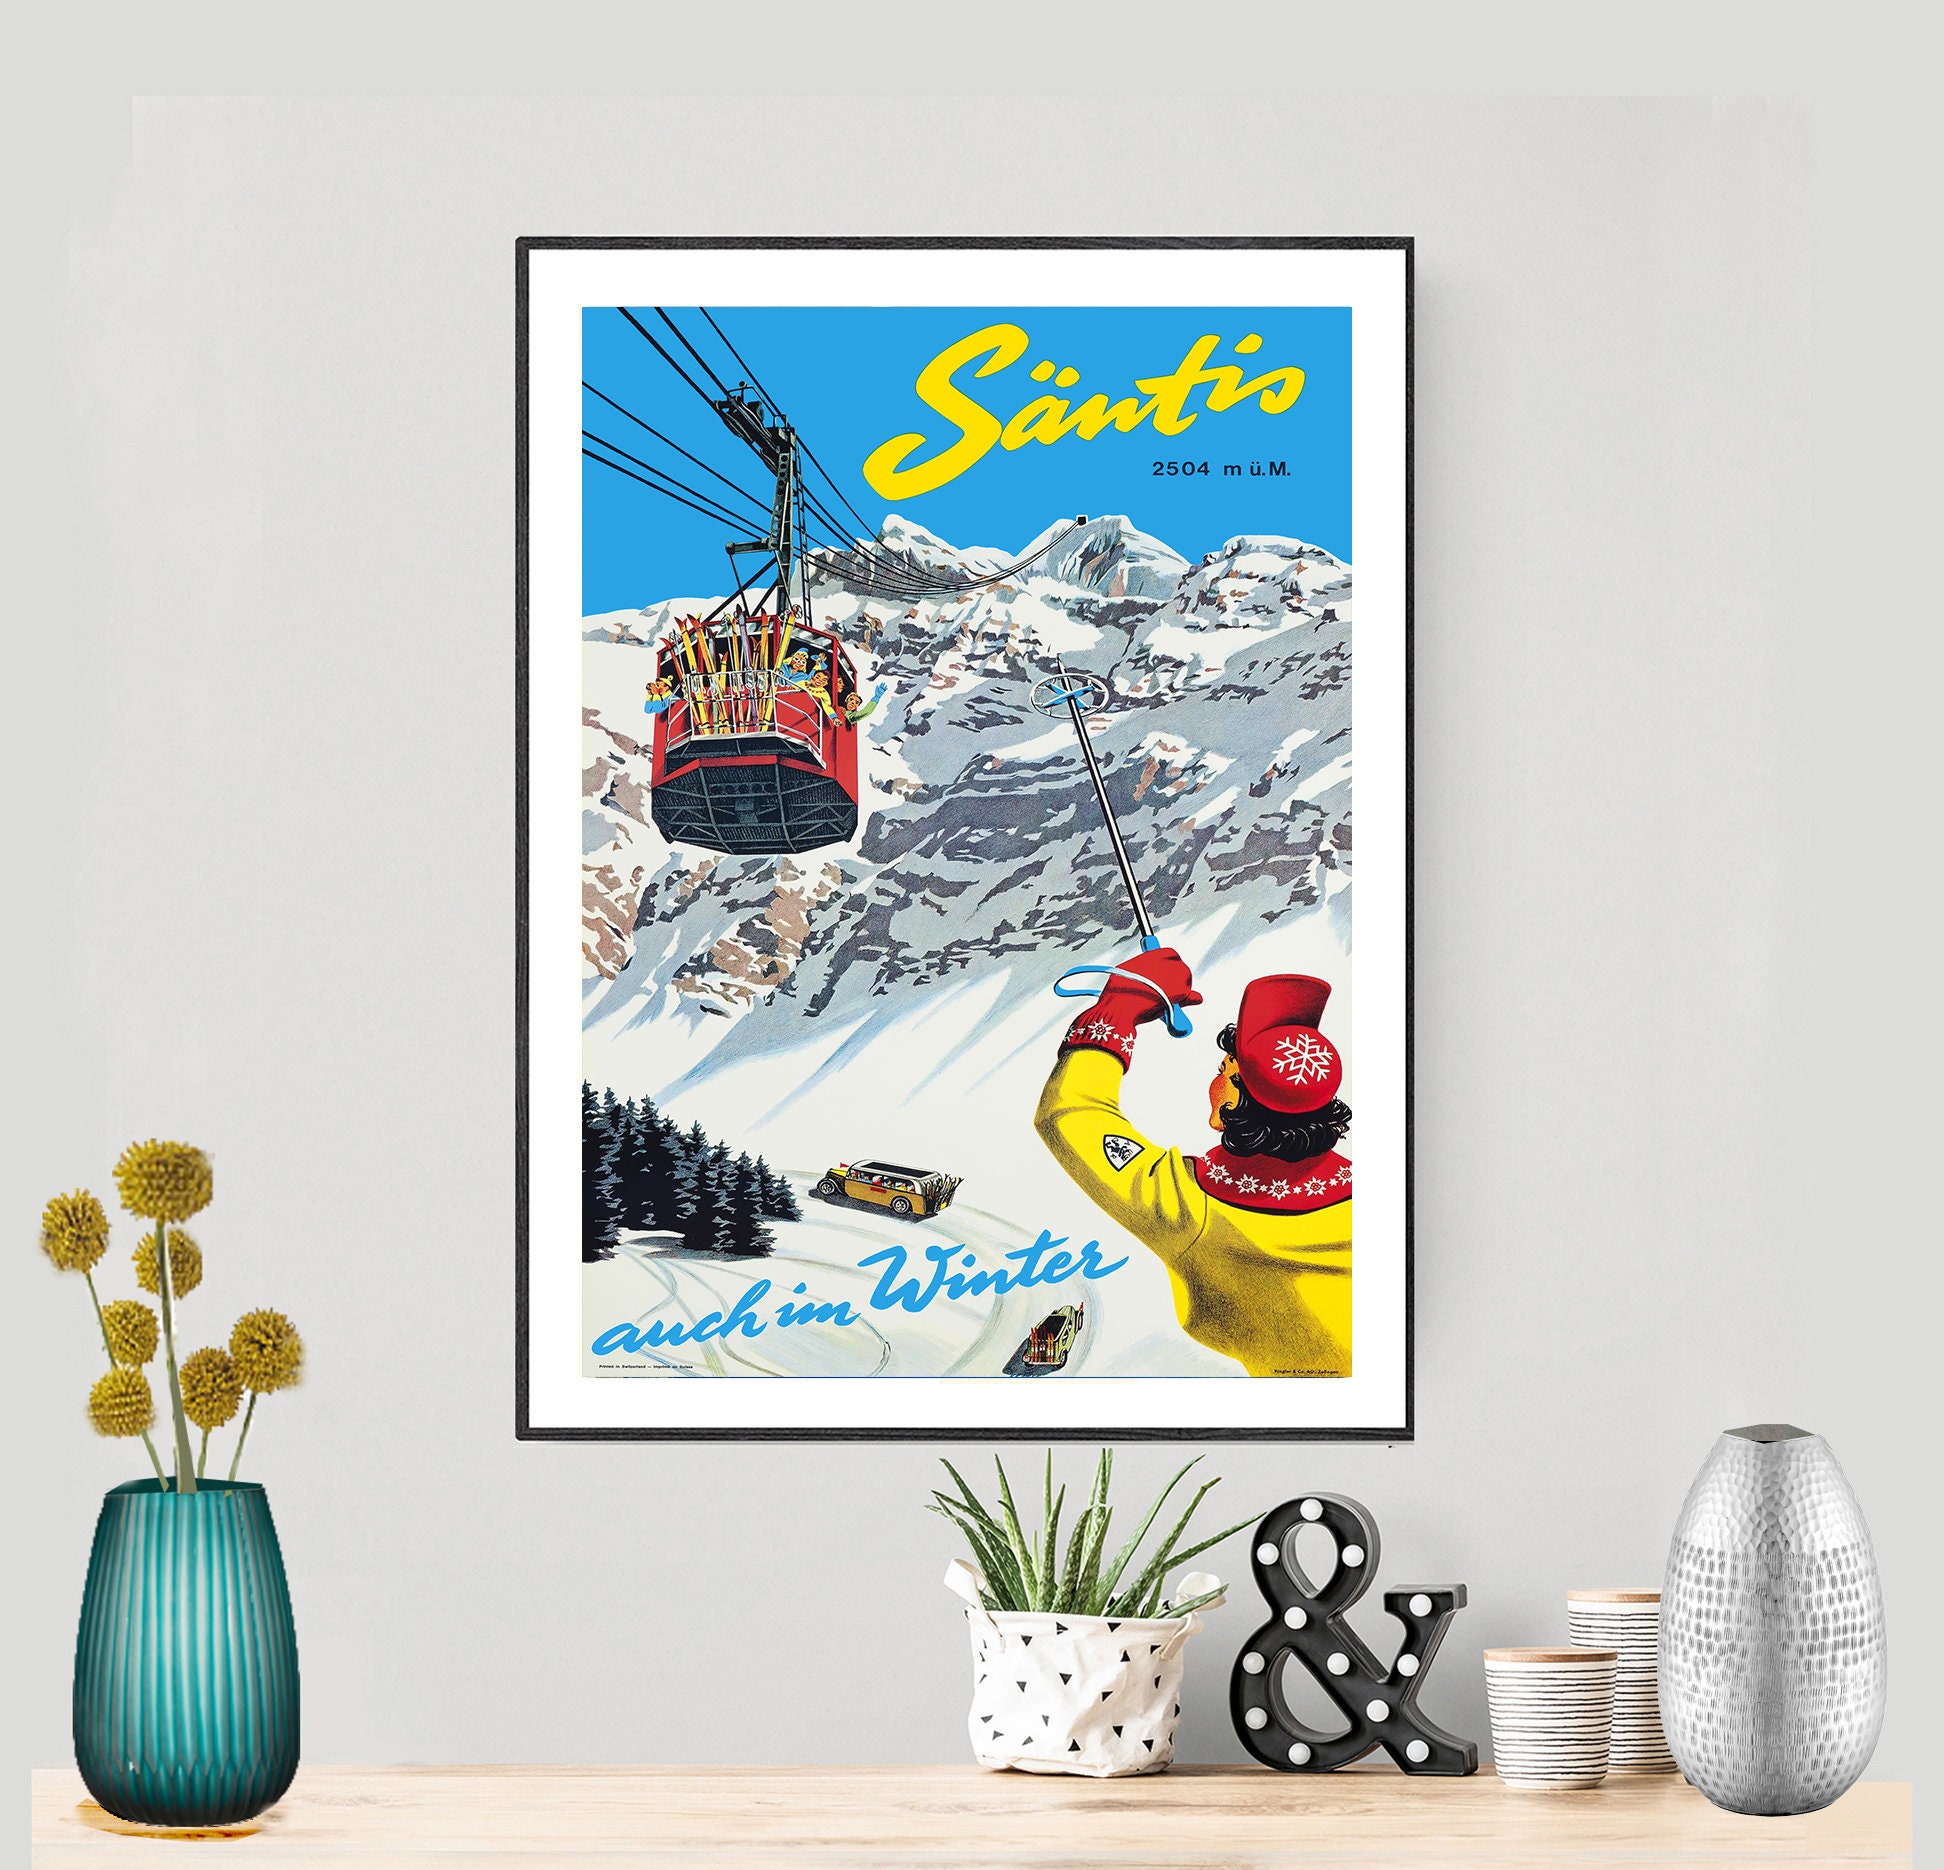 Santis auch im Winter, Suisse Vintage Travel Poster - Poster Paper or Canvas Print  Gift Idea  Wall Decor